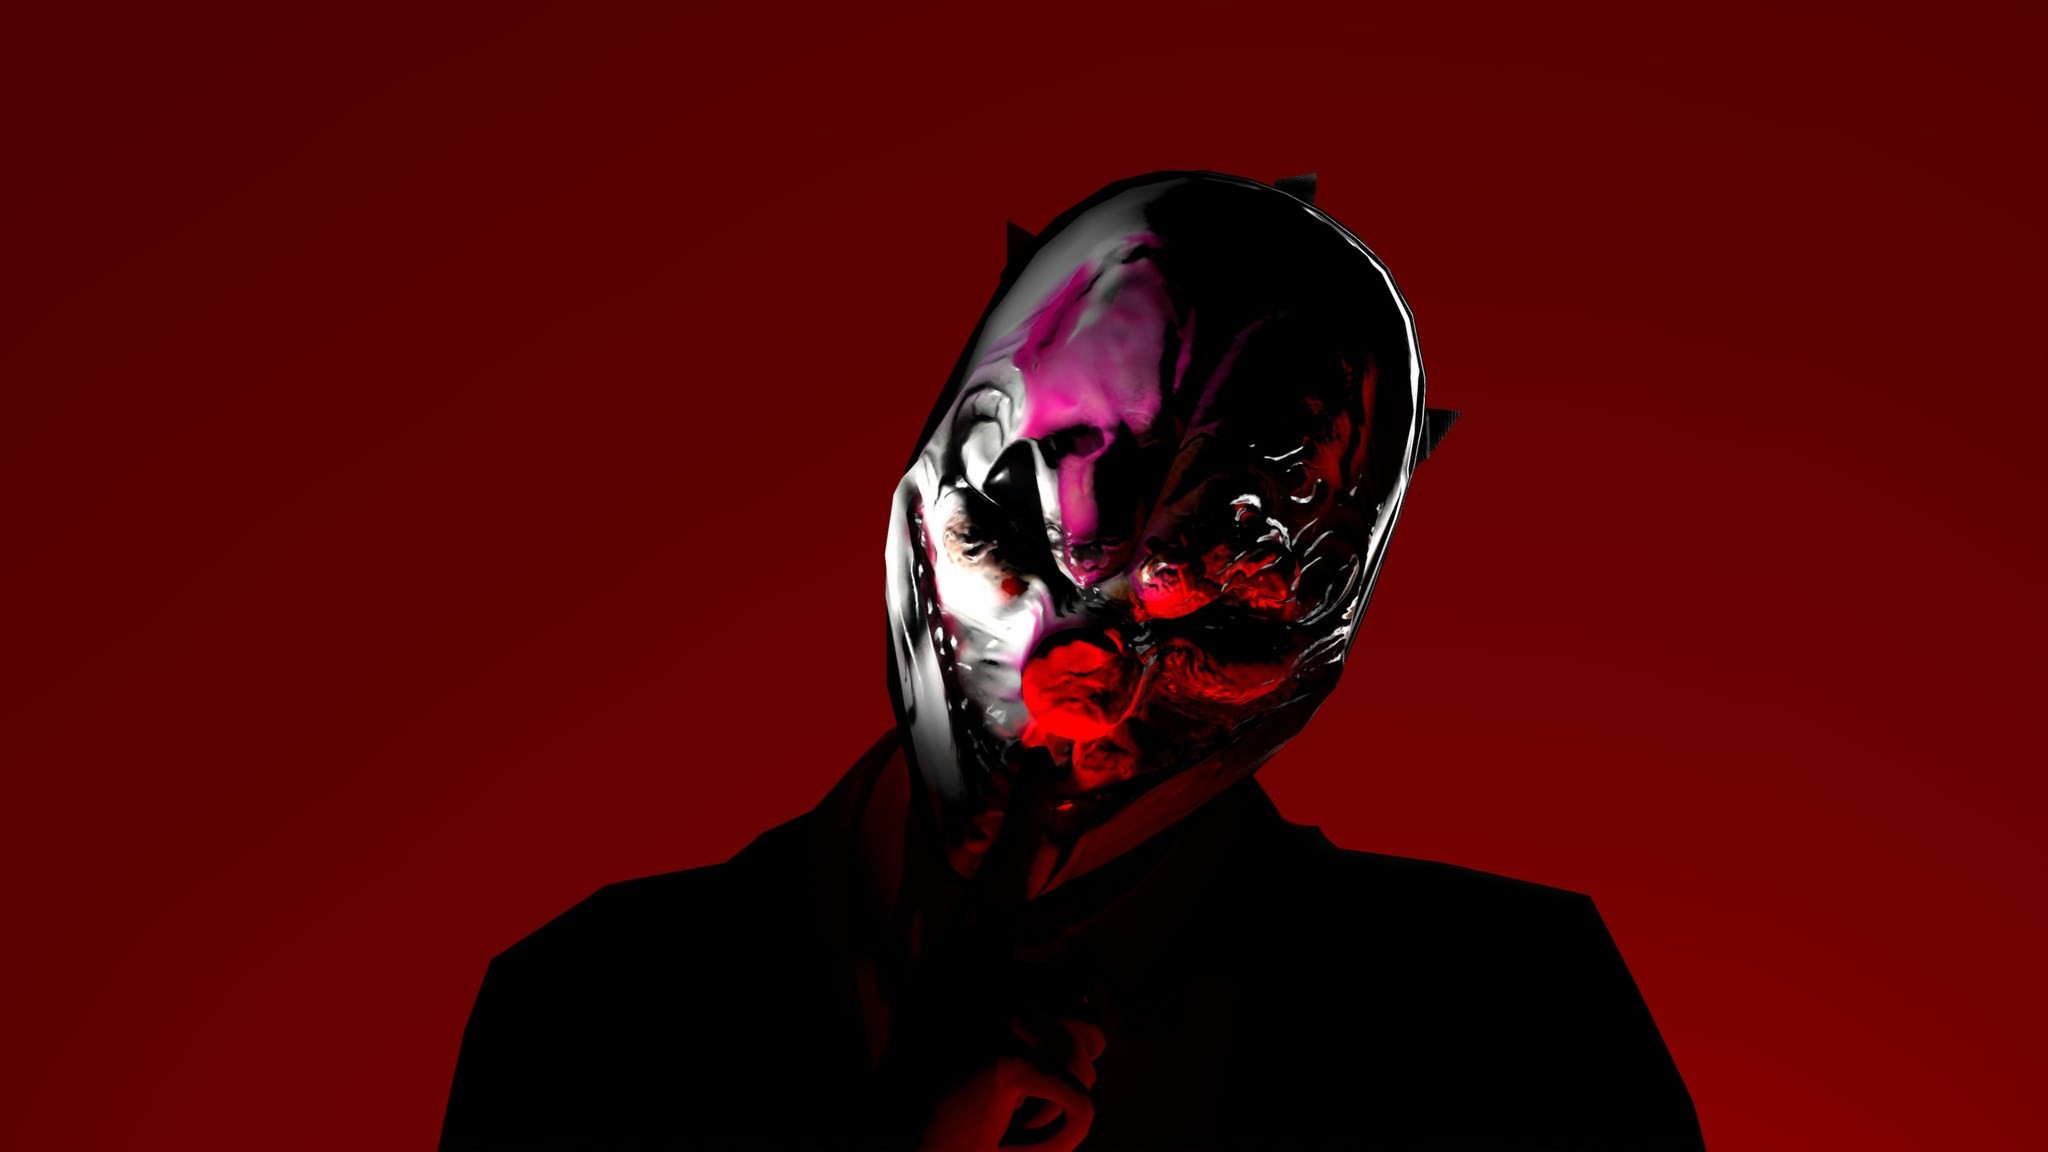 payday 2 wallpaper hd,red,fictional character,supervillain,photography,darkness